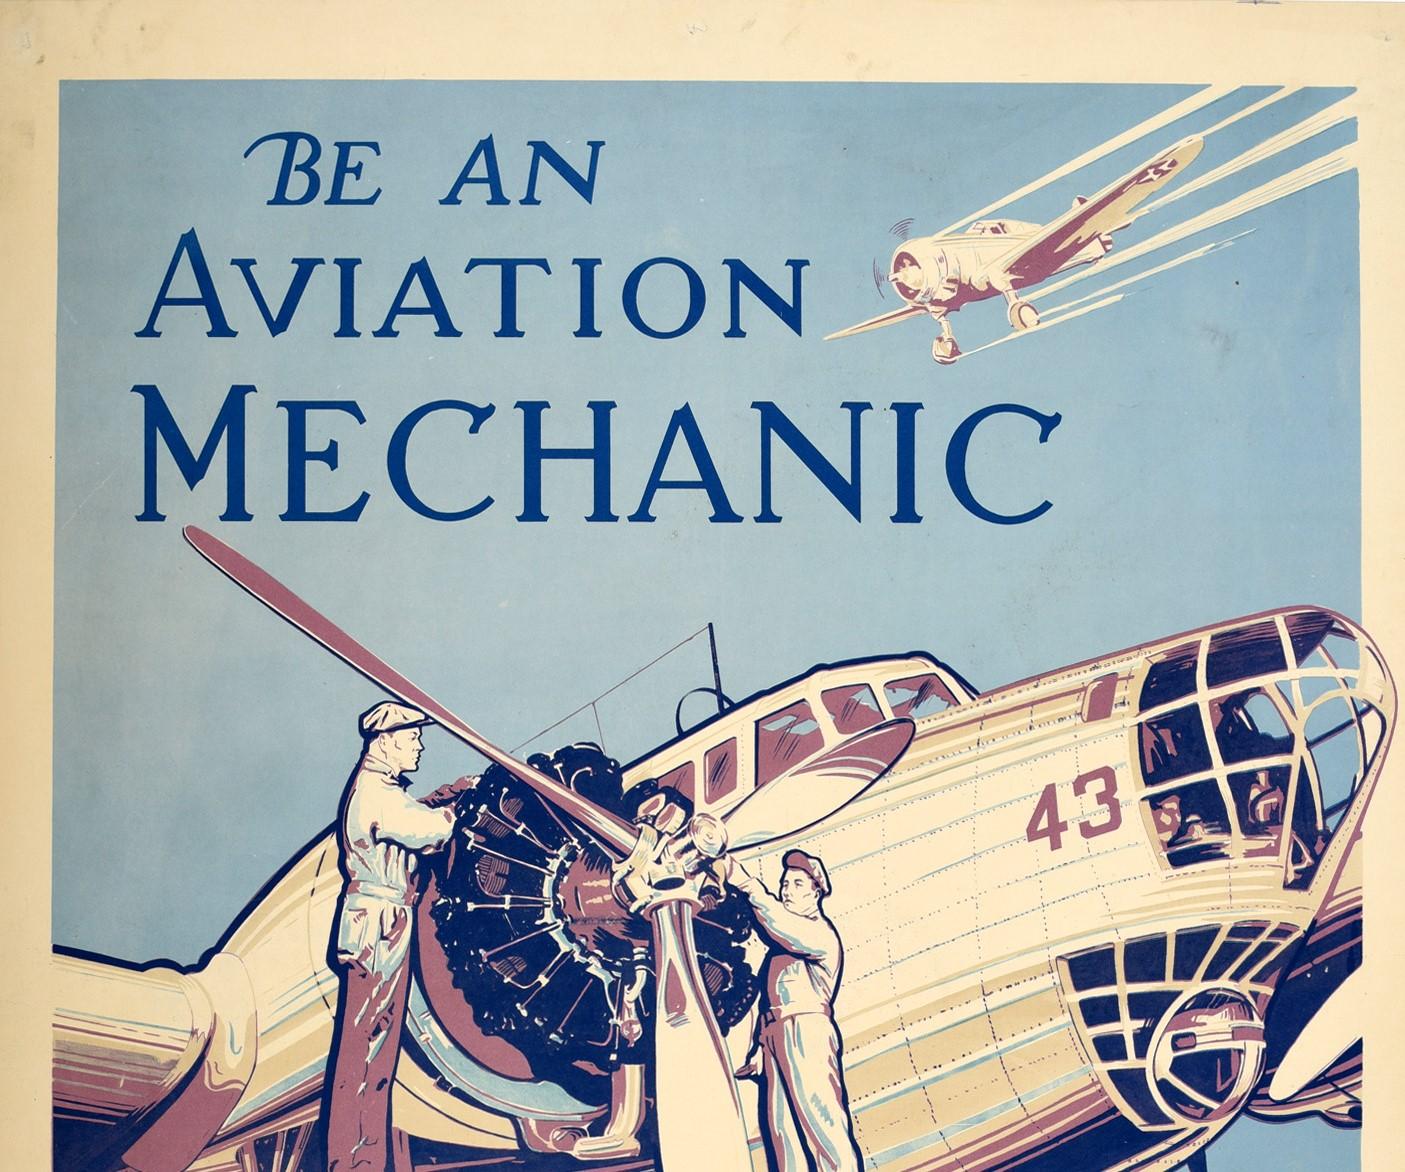 Original vintage World War Two recruitment poster - Be An Aviation Mechanic in the Air Corps US Army Enlist Now! - featuring great artwork showing two mechanics working on the propeller of a military bomber plane on an airfield with a plane flying